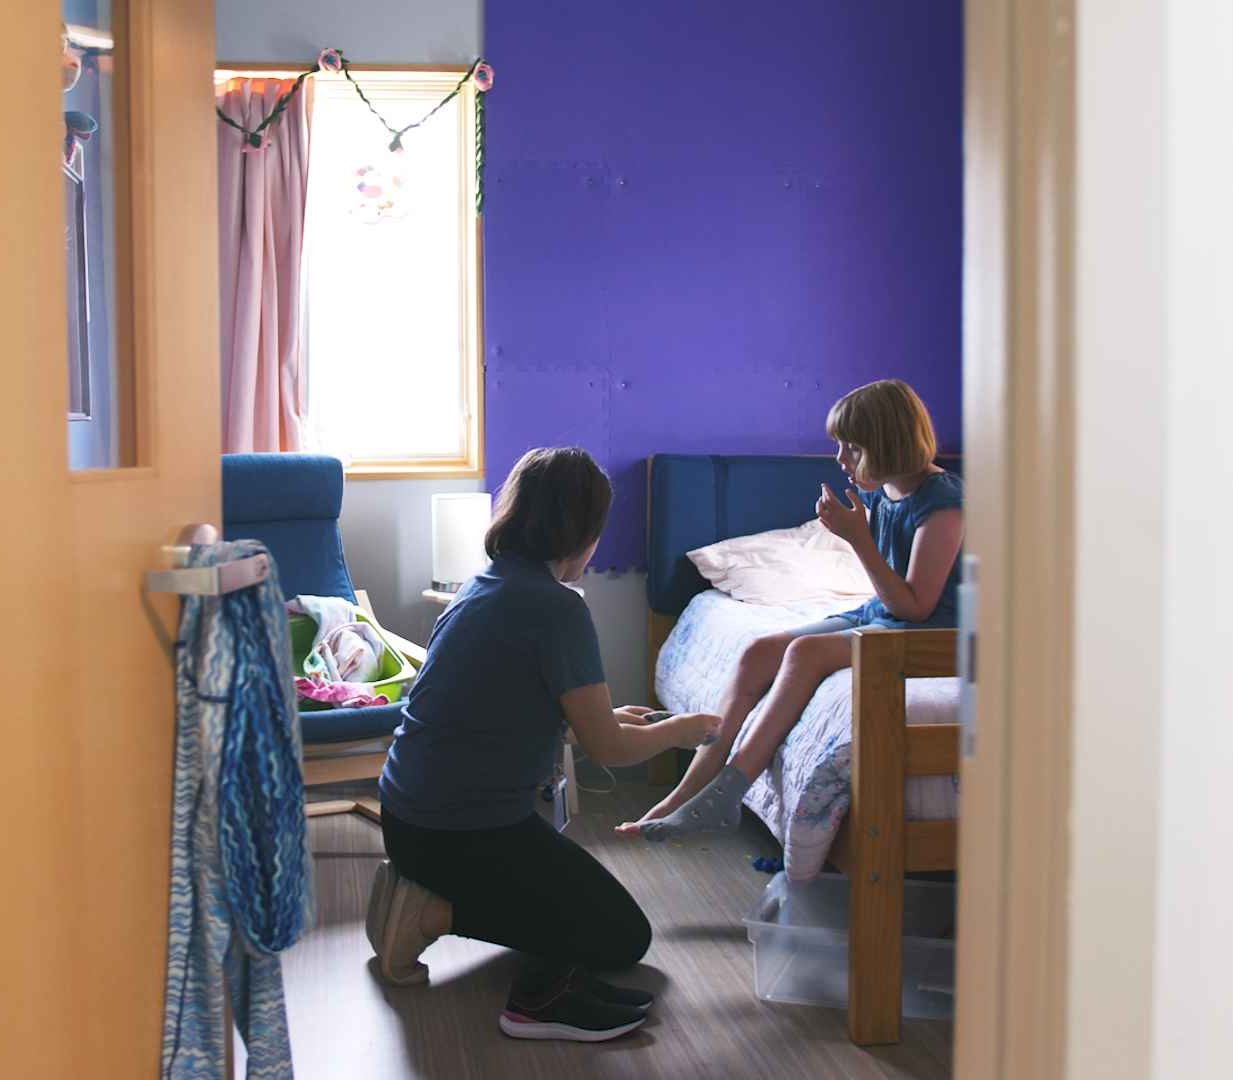 Paraprofessional helping a child put on her shoes. They are in a bedroom and the child is sitting on her bed. She has blonde short hair and a blue shirt. Her walls are purple.